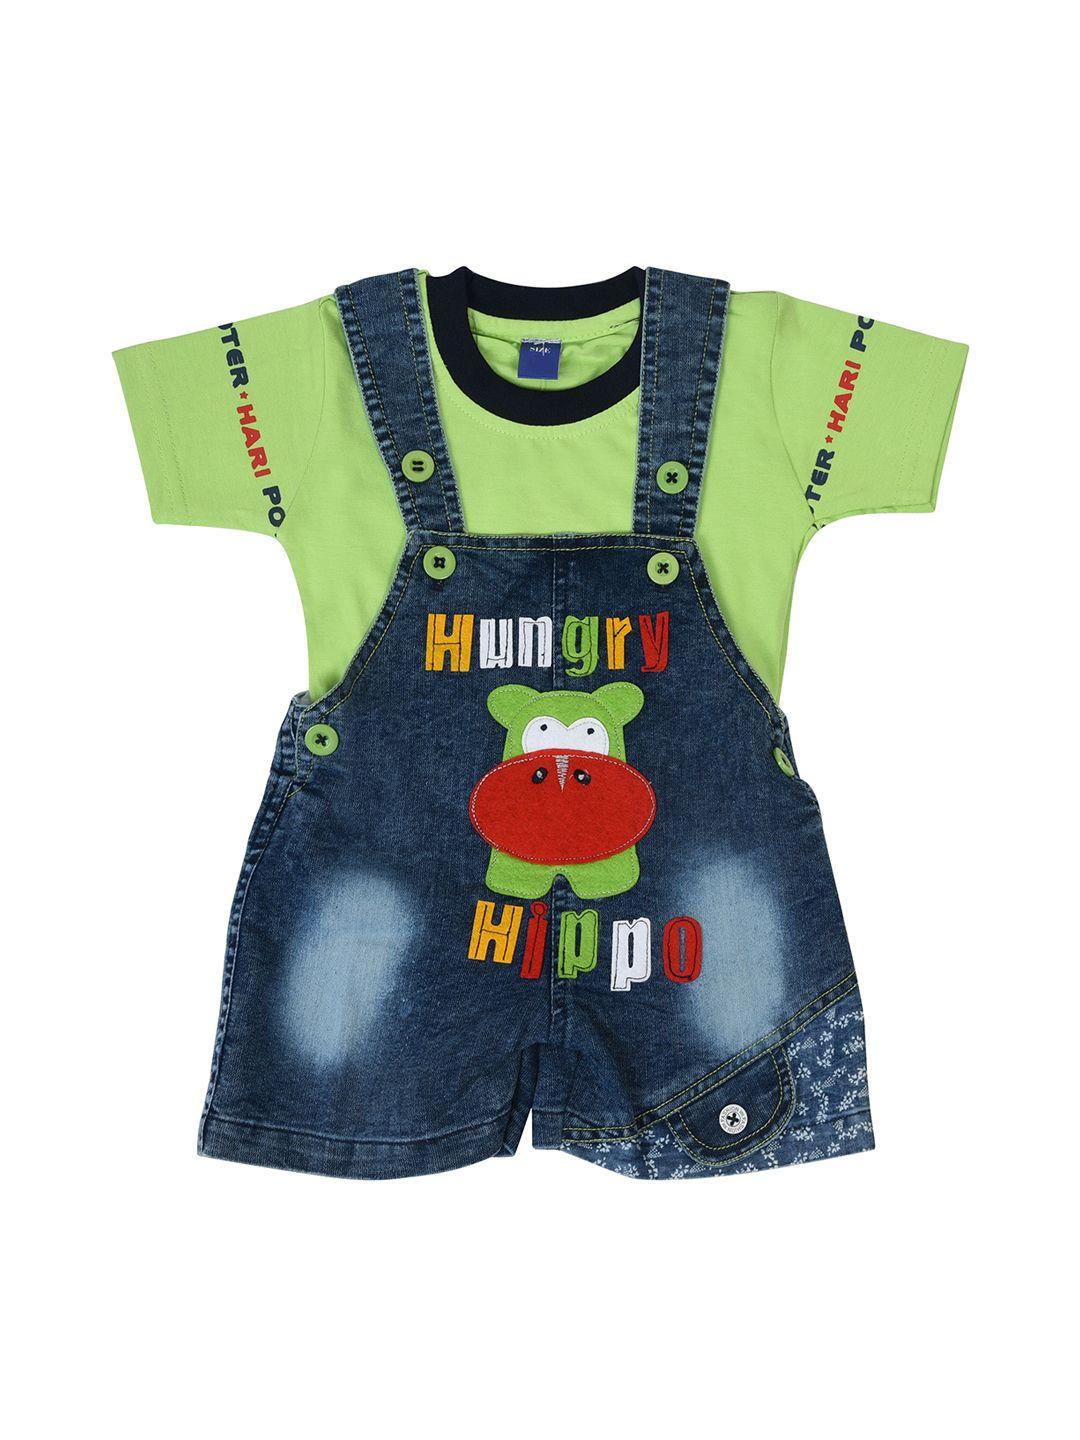 BORN WEAR Unisex Kids Green & Navy Blue Printed T-shirt with Shorts